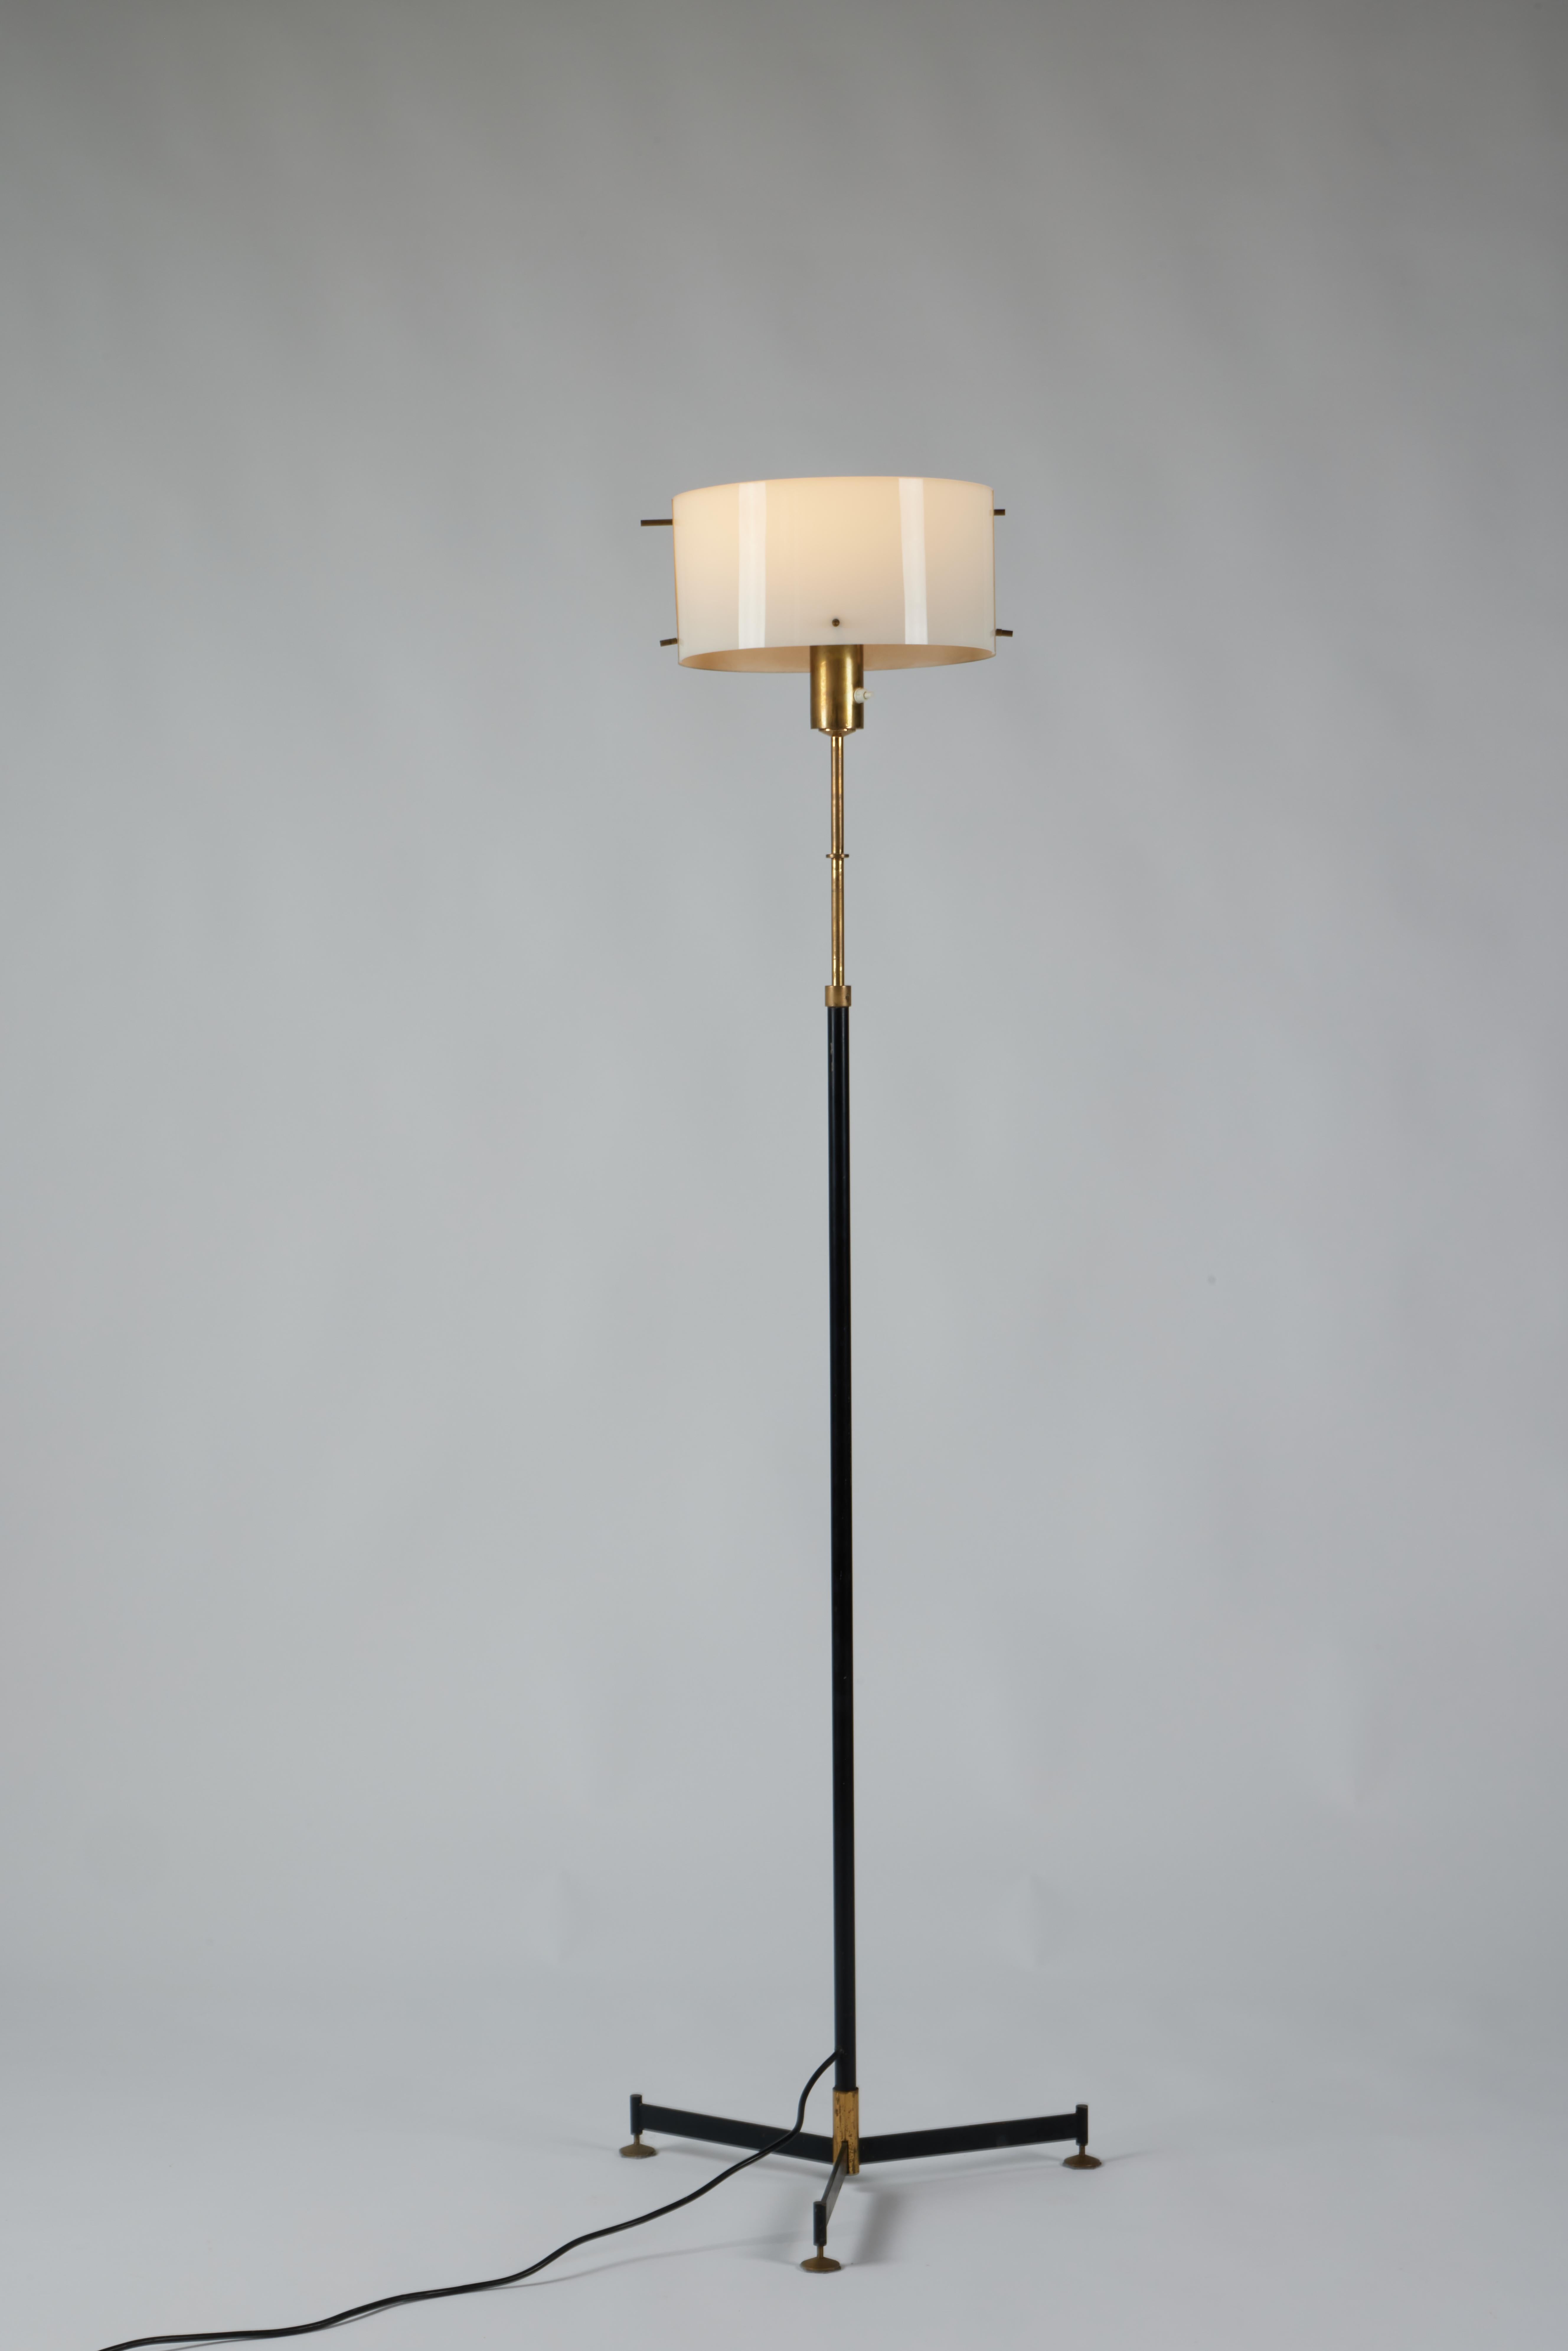 Italian Mid-Century, Modern Floor Lamp with Adjustable Height by Stilnovo, 1950s In Good Condition For Sale In Milan, IT